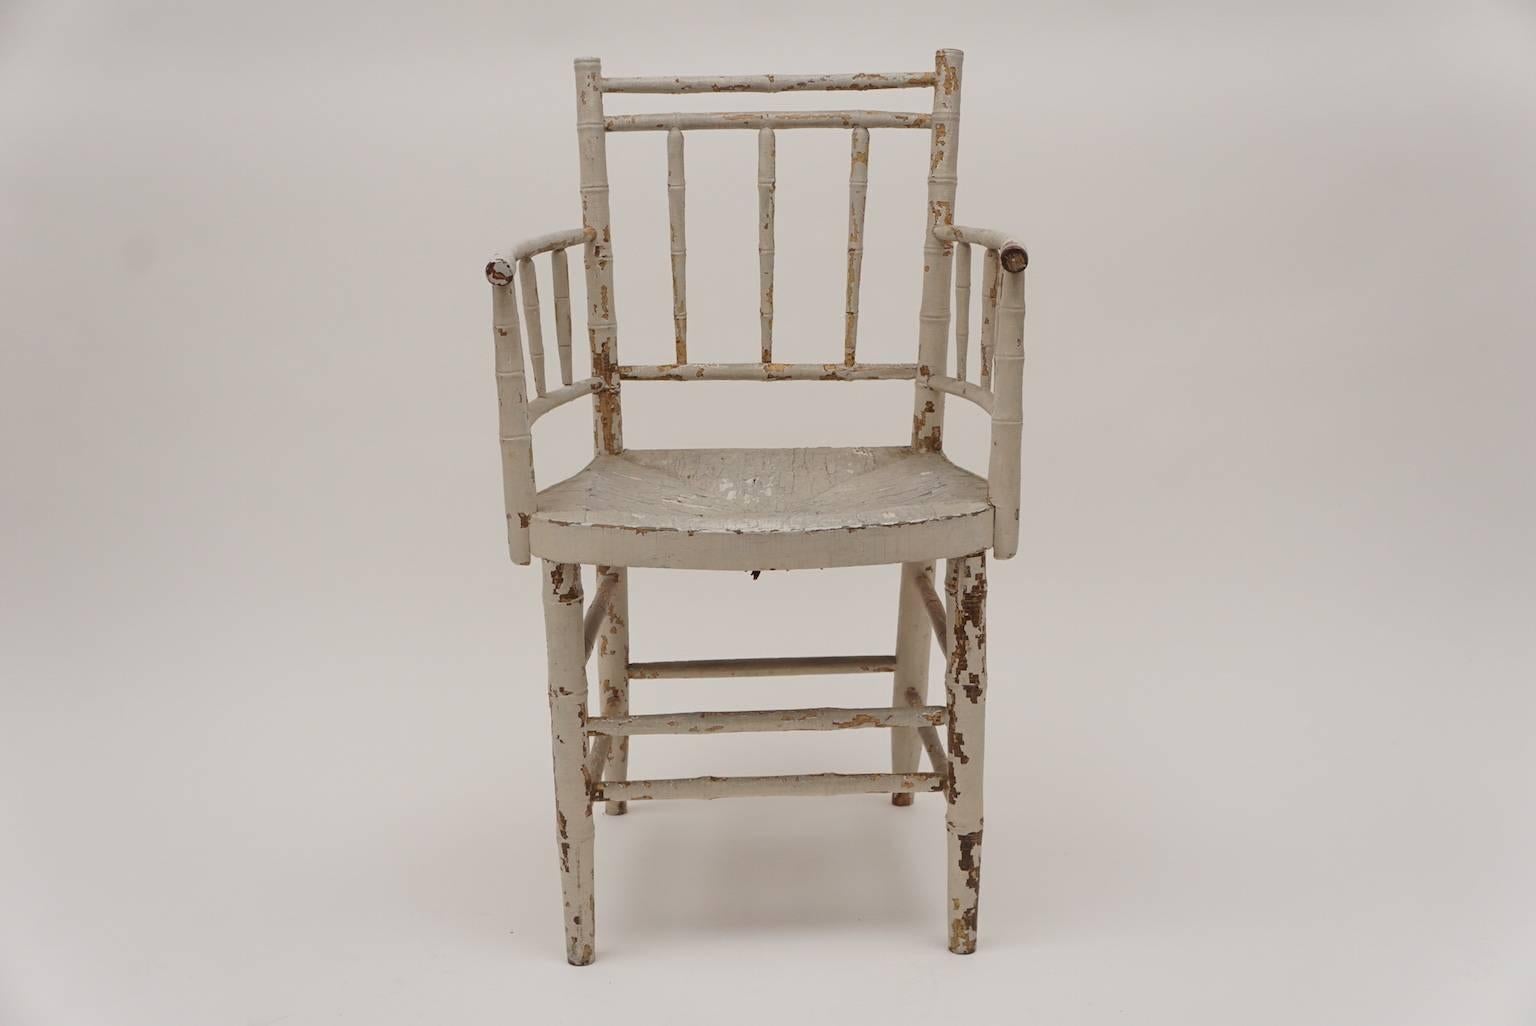 Charming off-white pearly-painted Federal armchair with painted rush seat.
